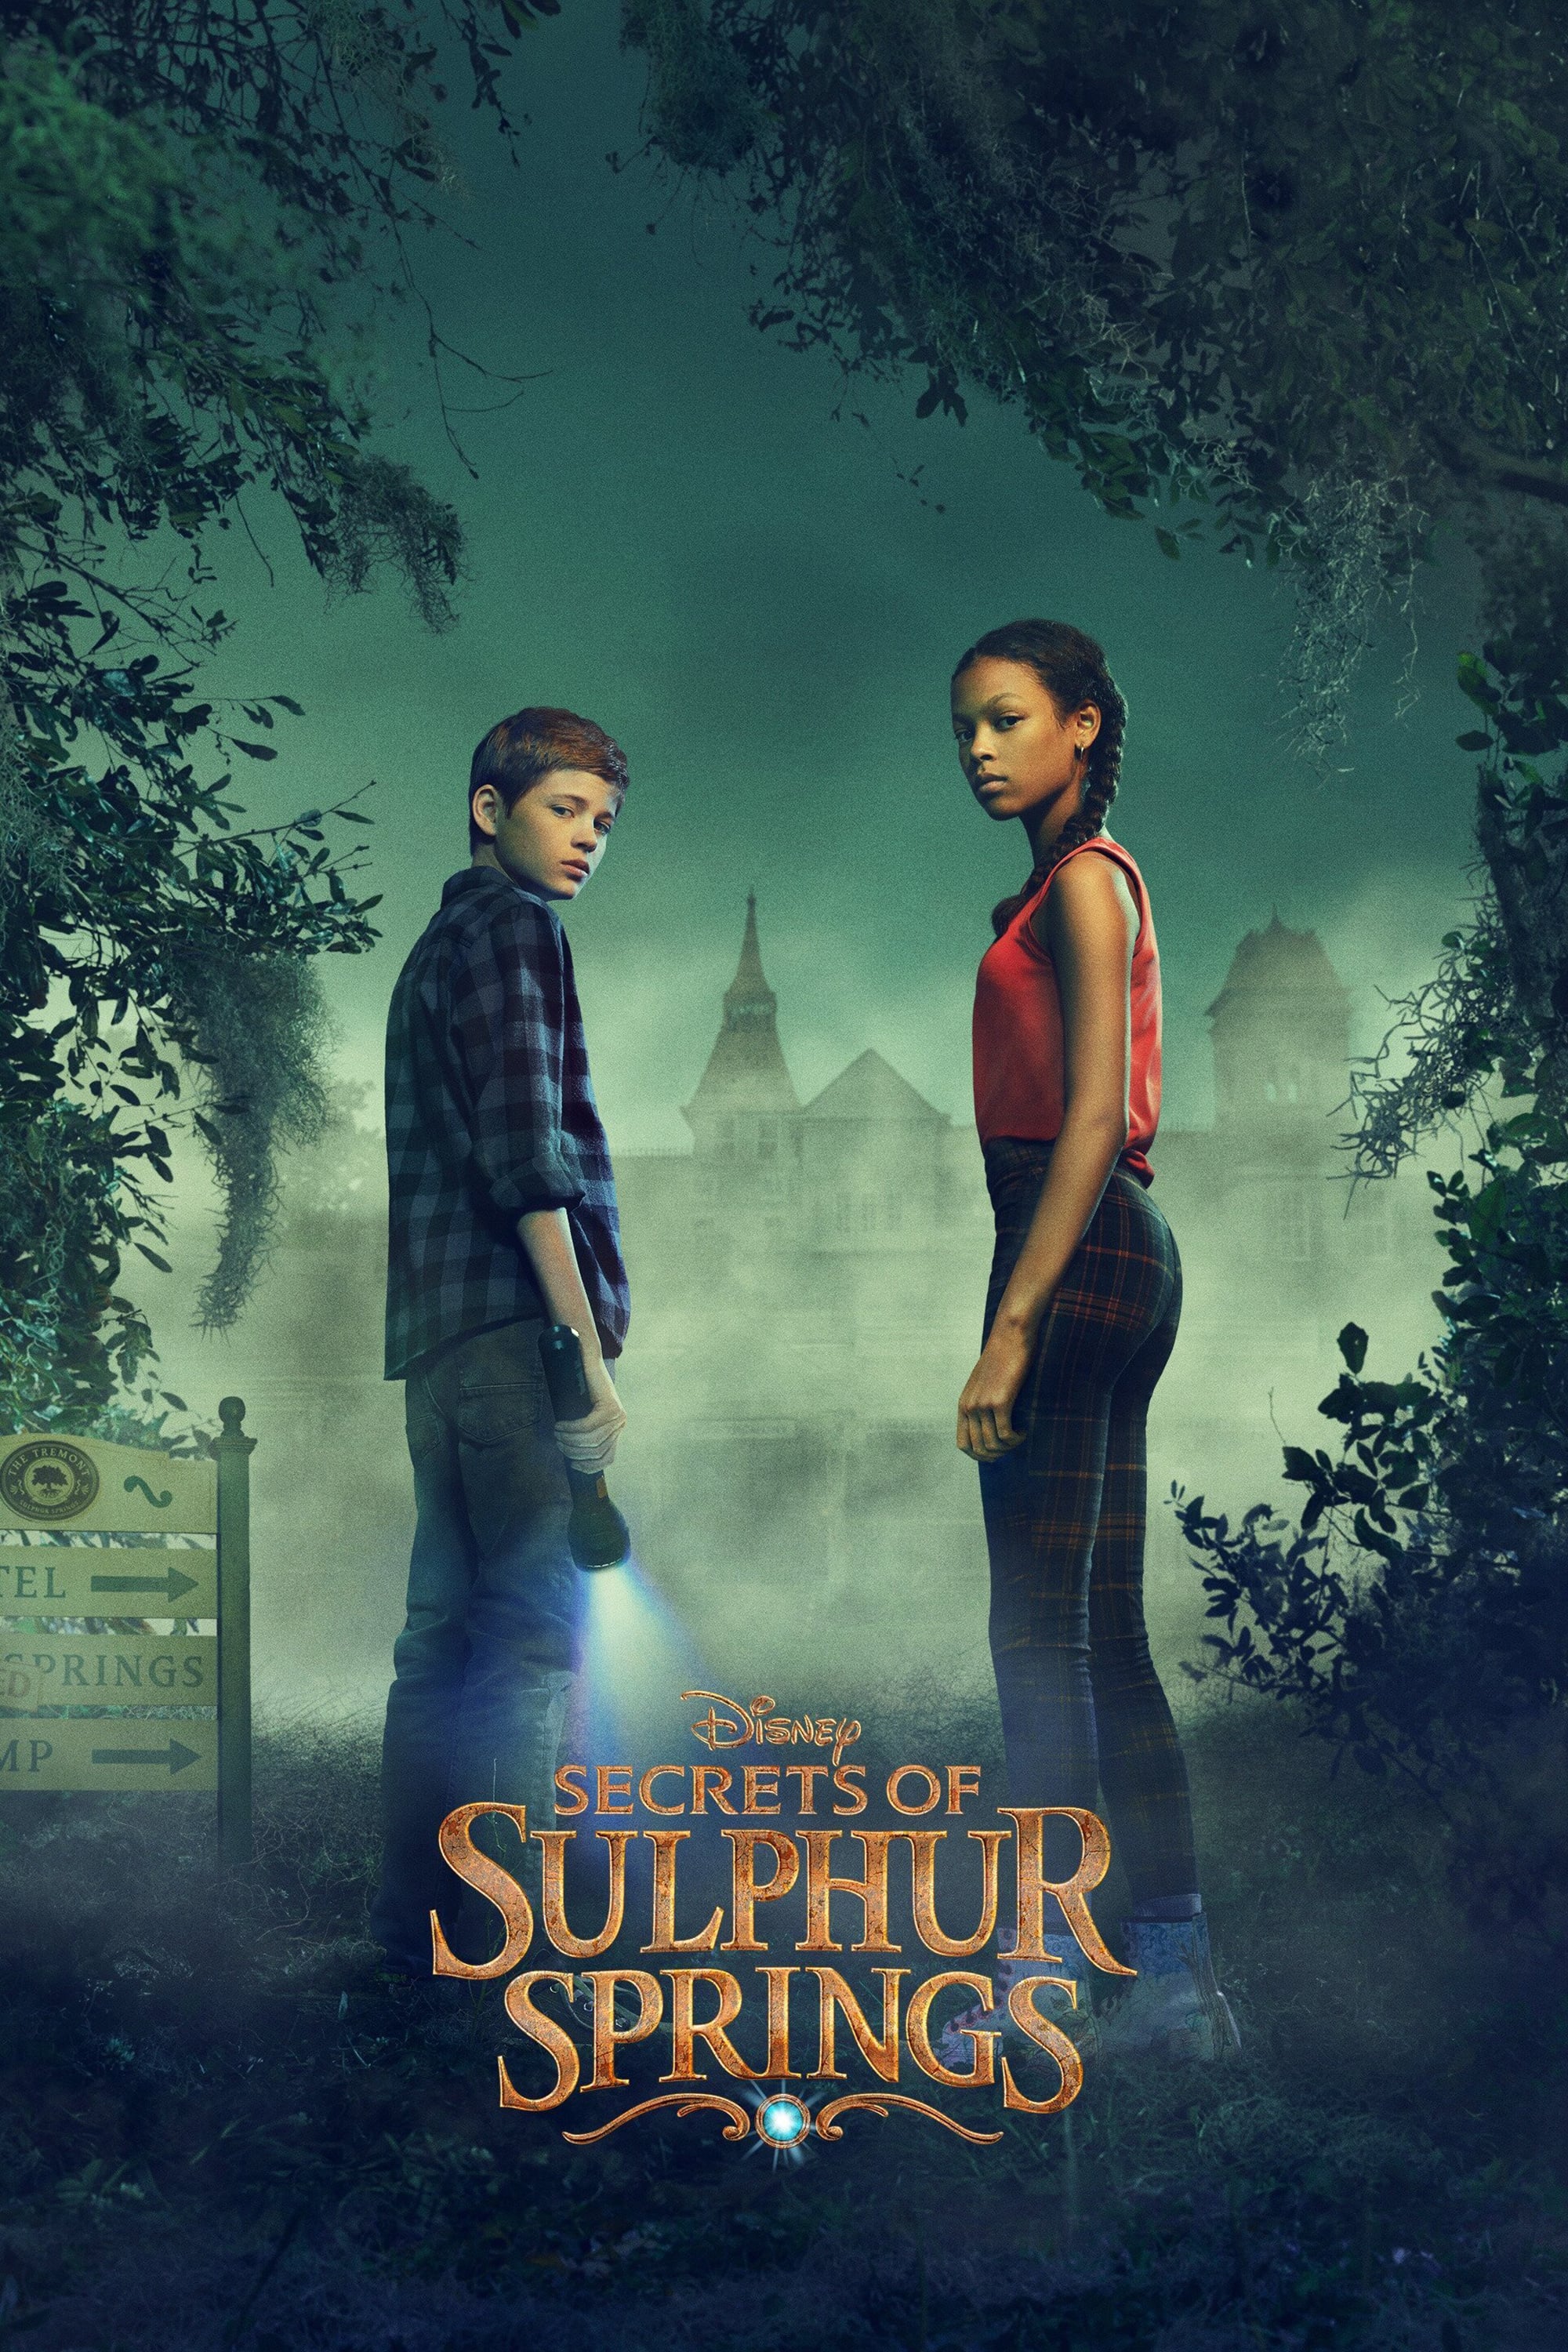 who plays griffin in secrets of sulphur springs